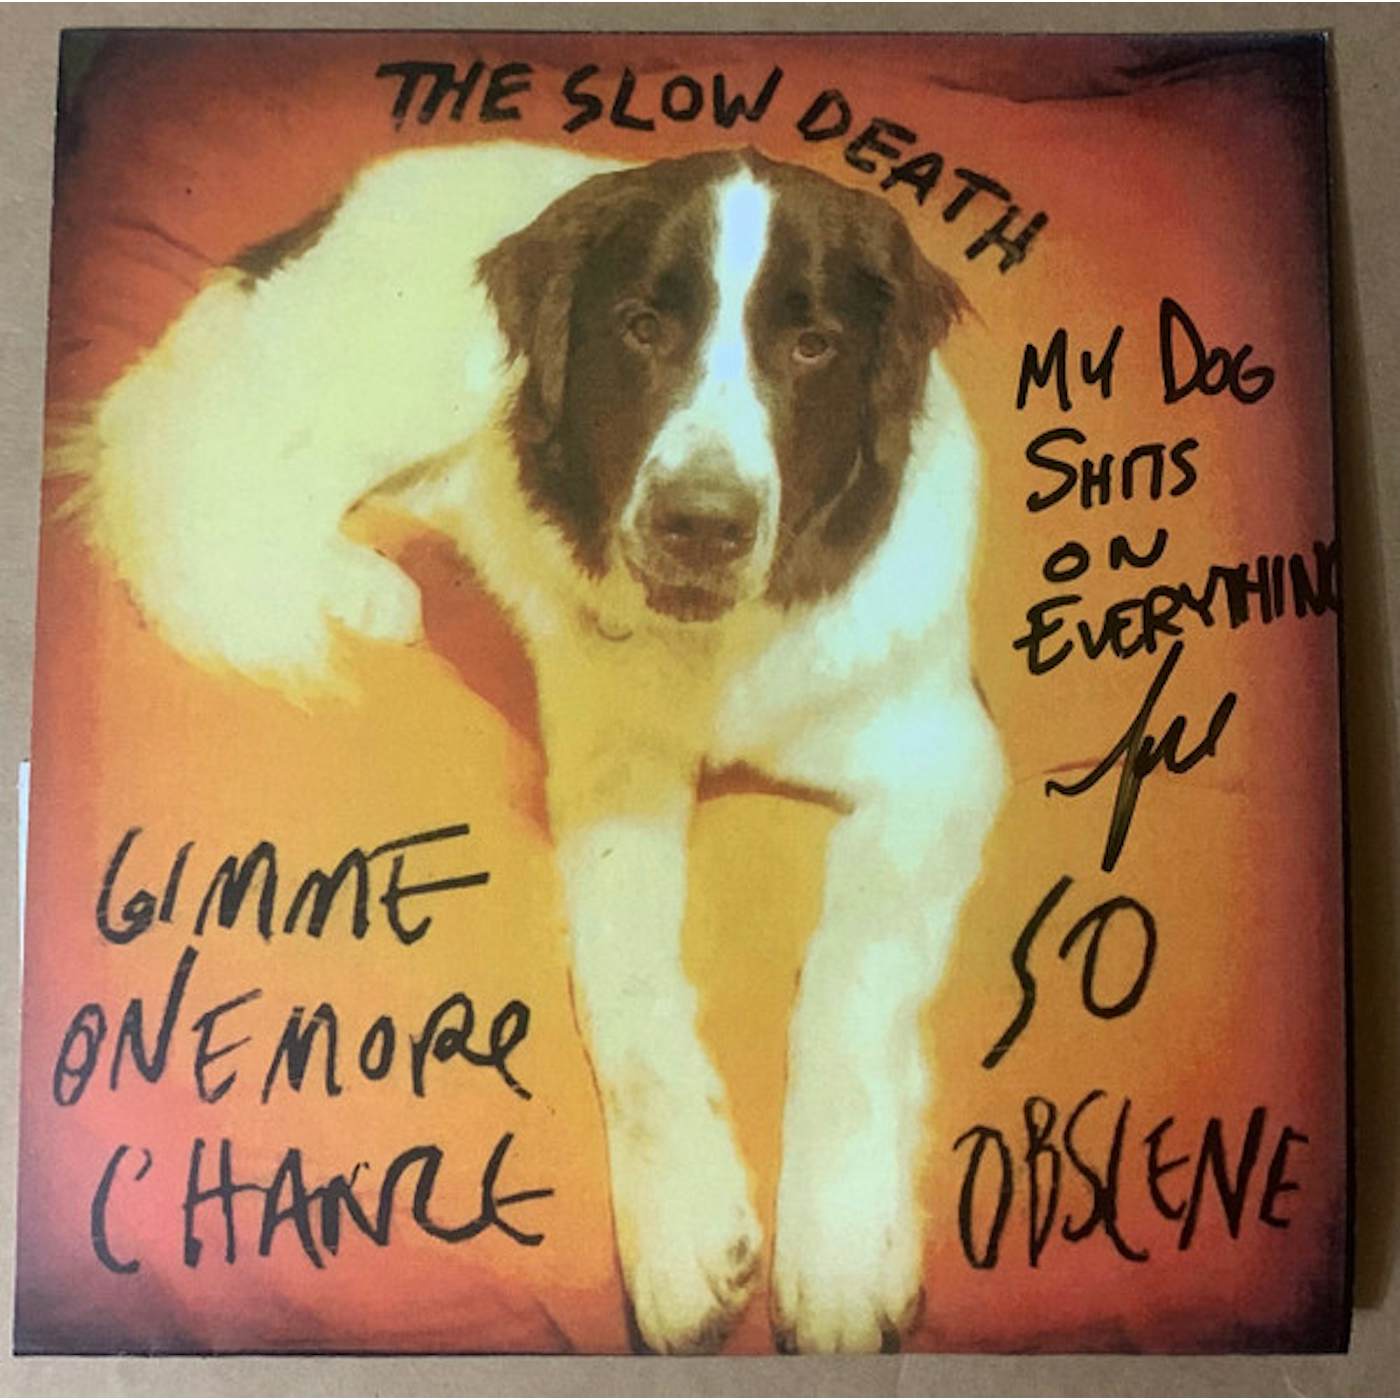 The Slow Death Gimme One More Chance / So Obscene Vinyl Record